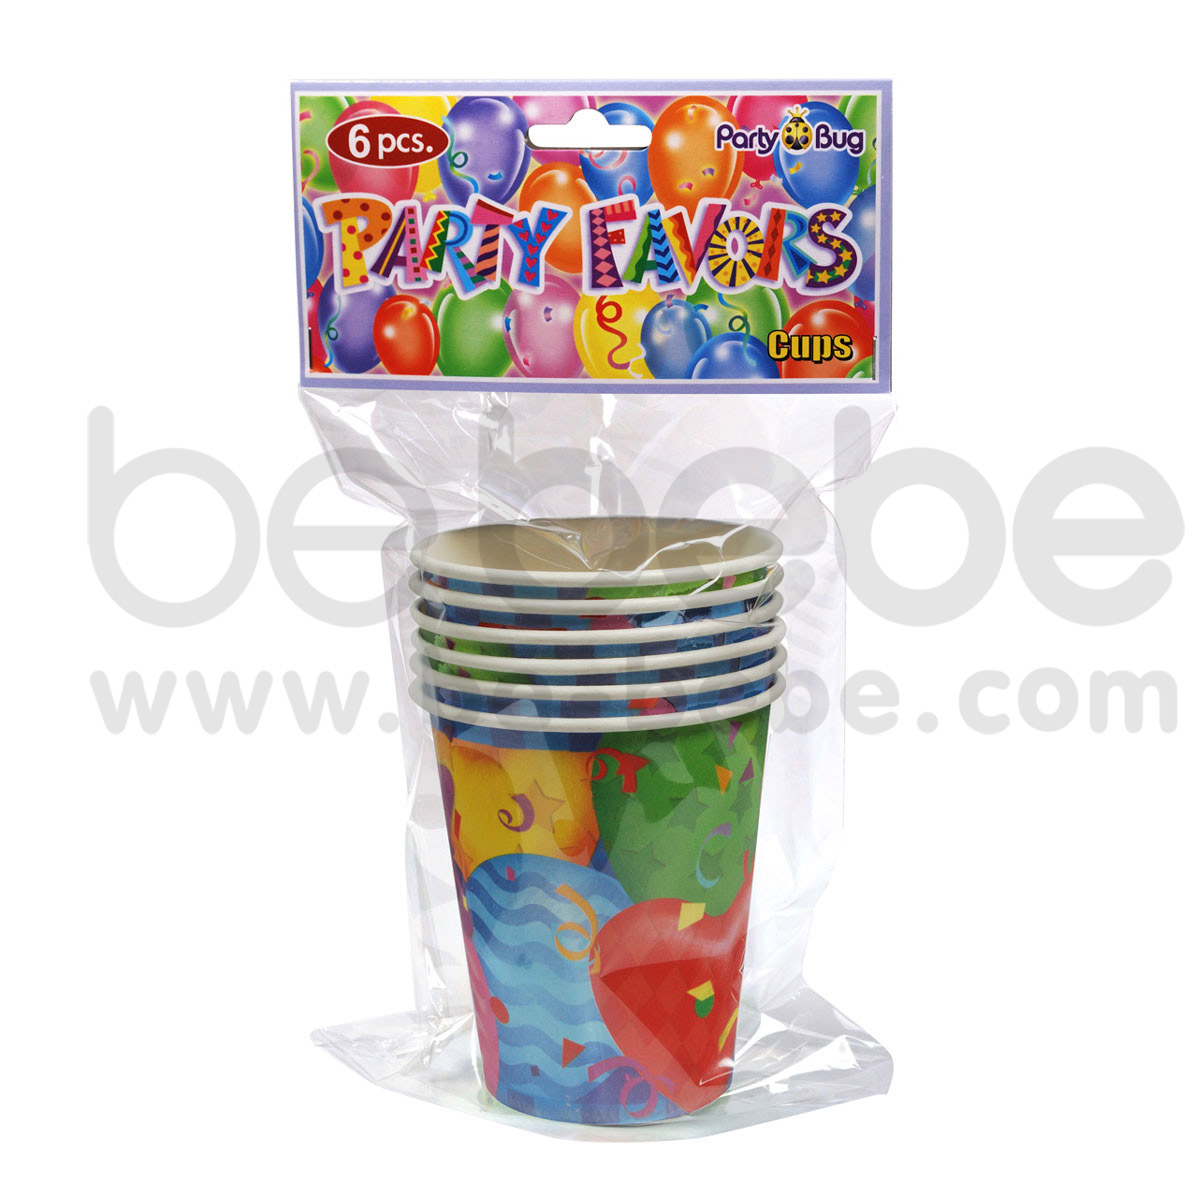 PARTY BUG : Paper cup 9 Oz., 1 Pack